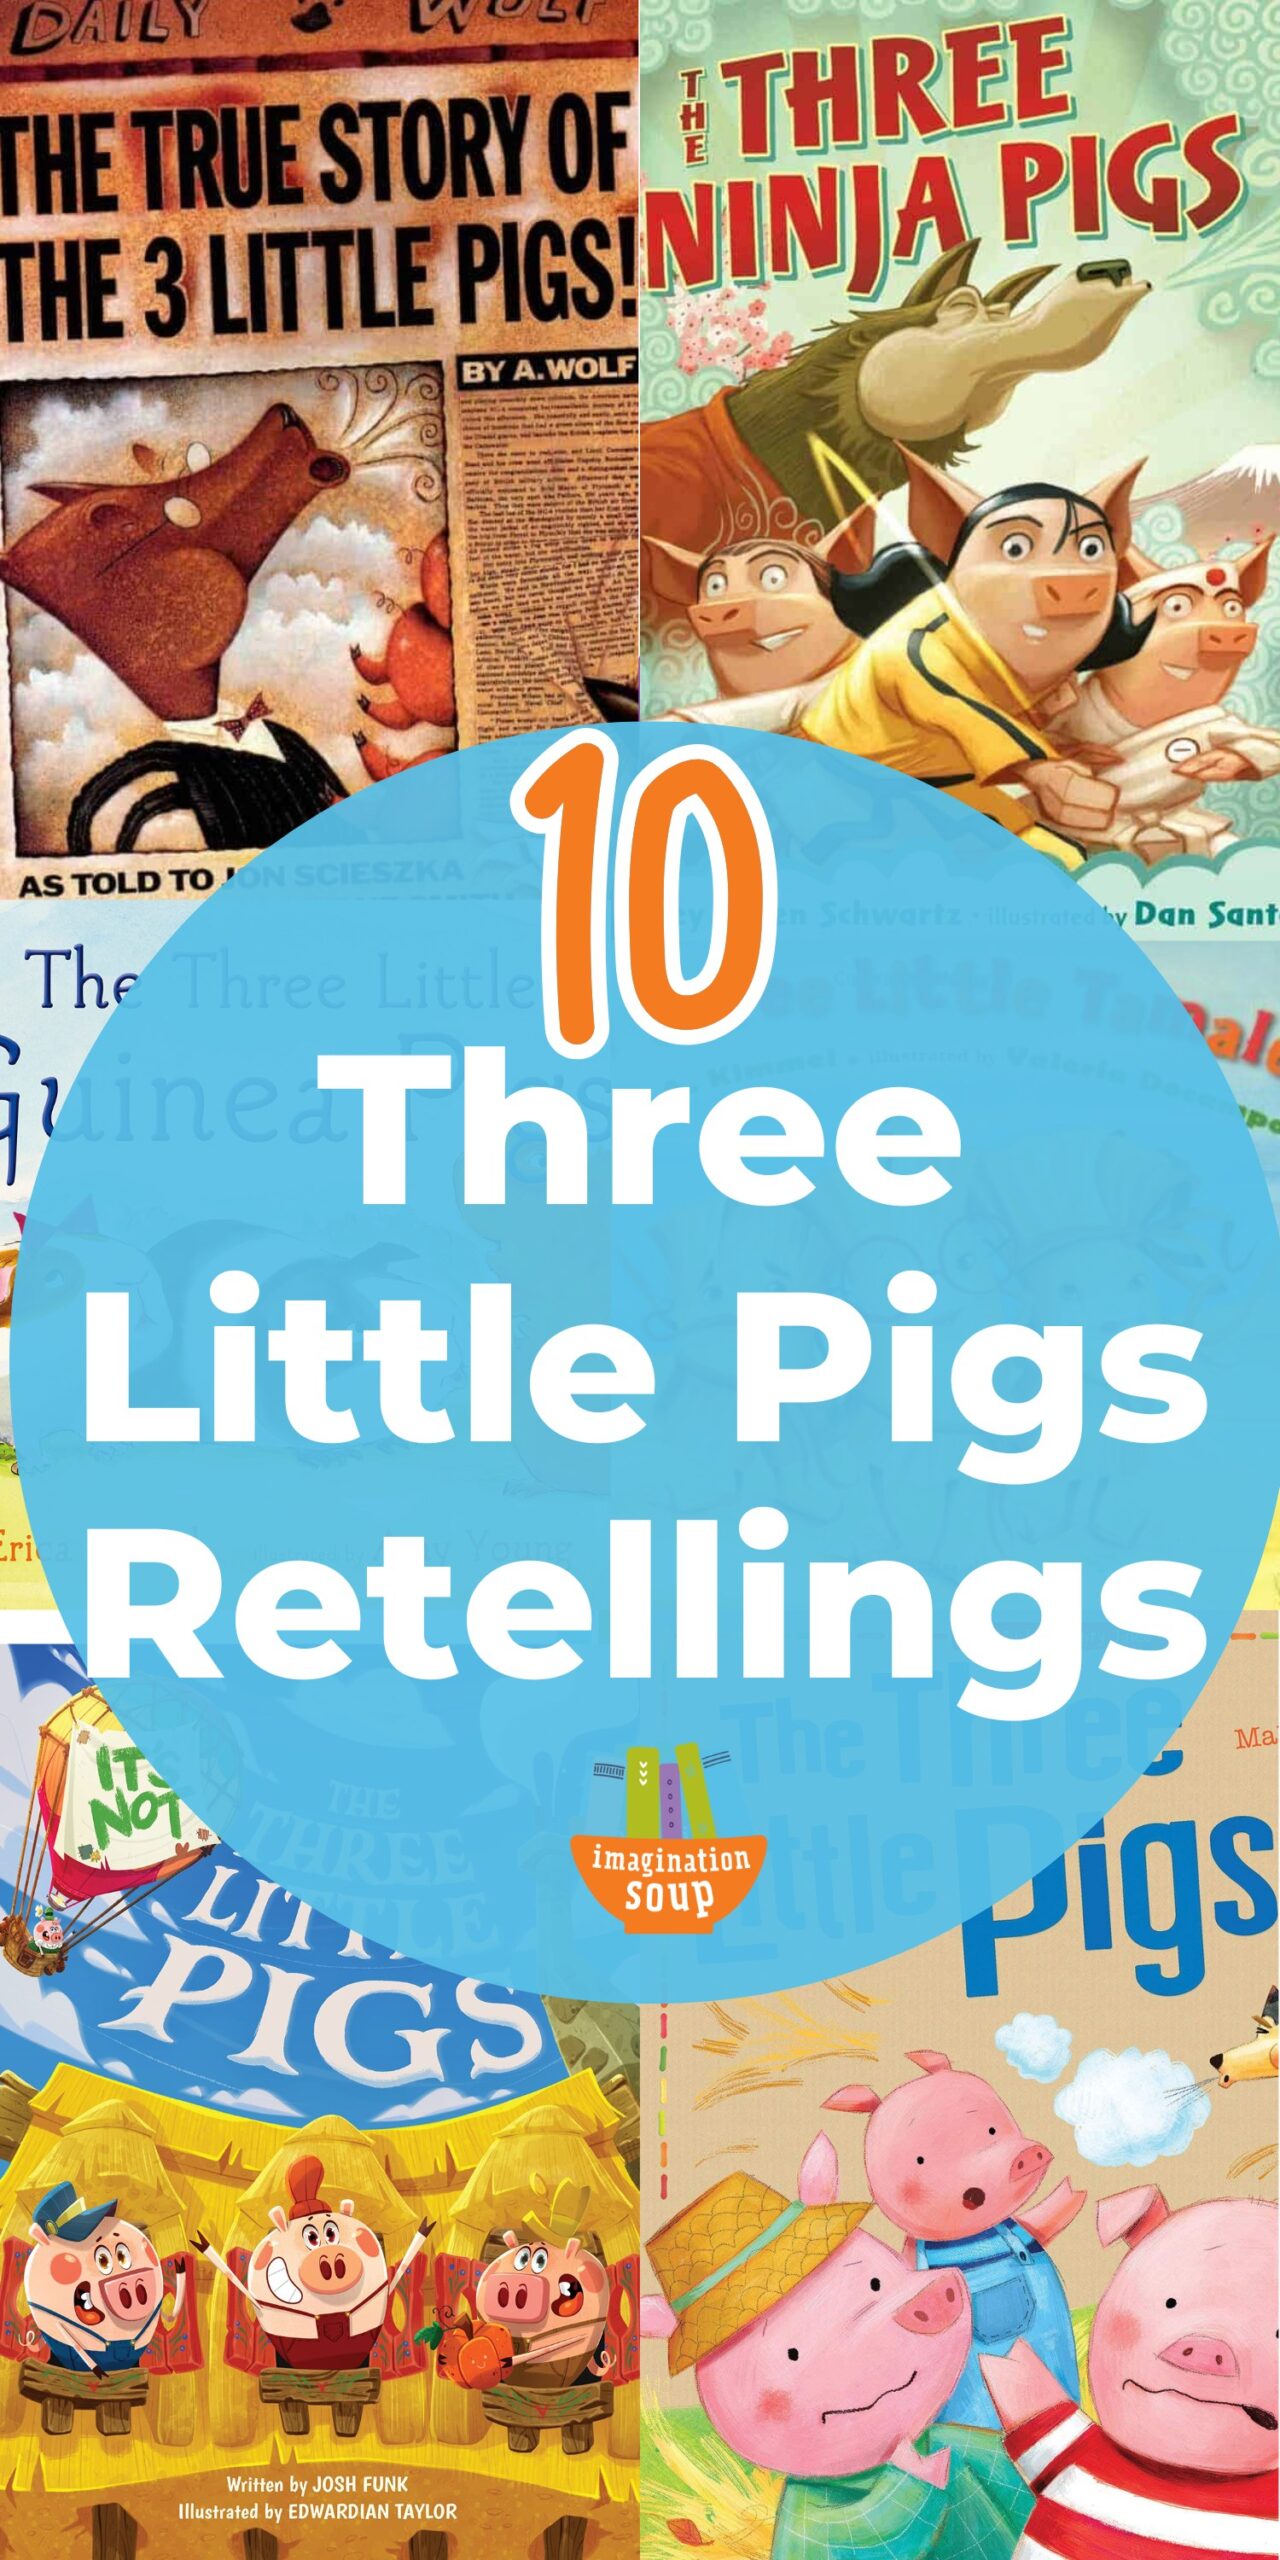 Introduce your children to the Three Little Pigs original story and then read the clever variations and retellings of this fairy tale!